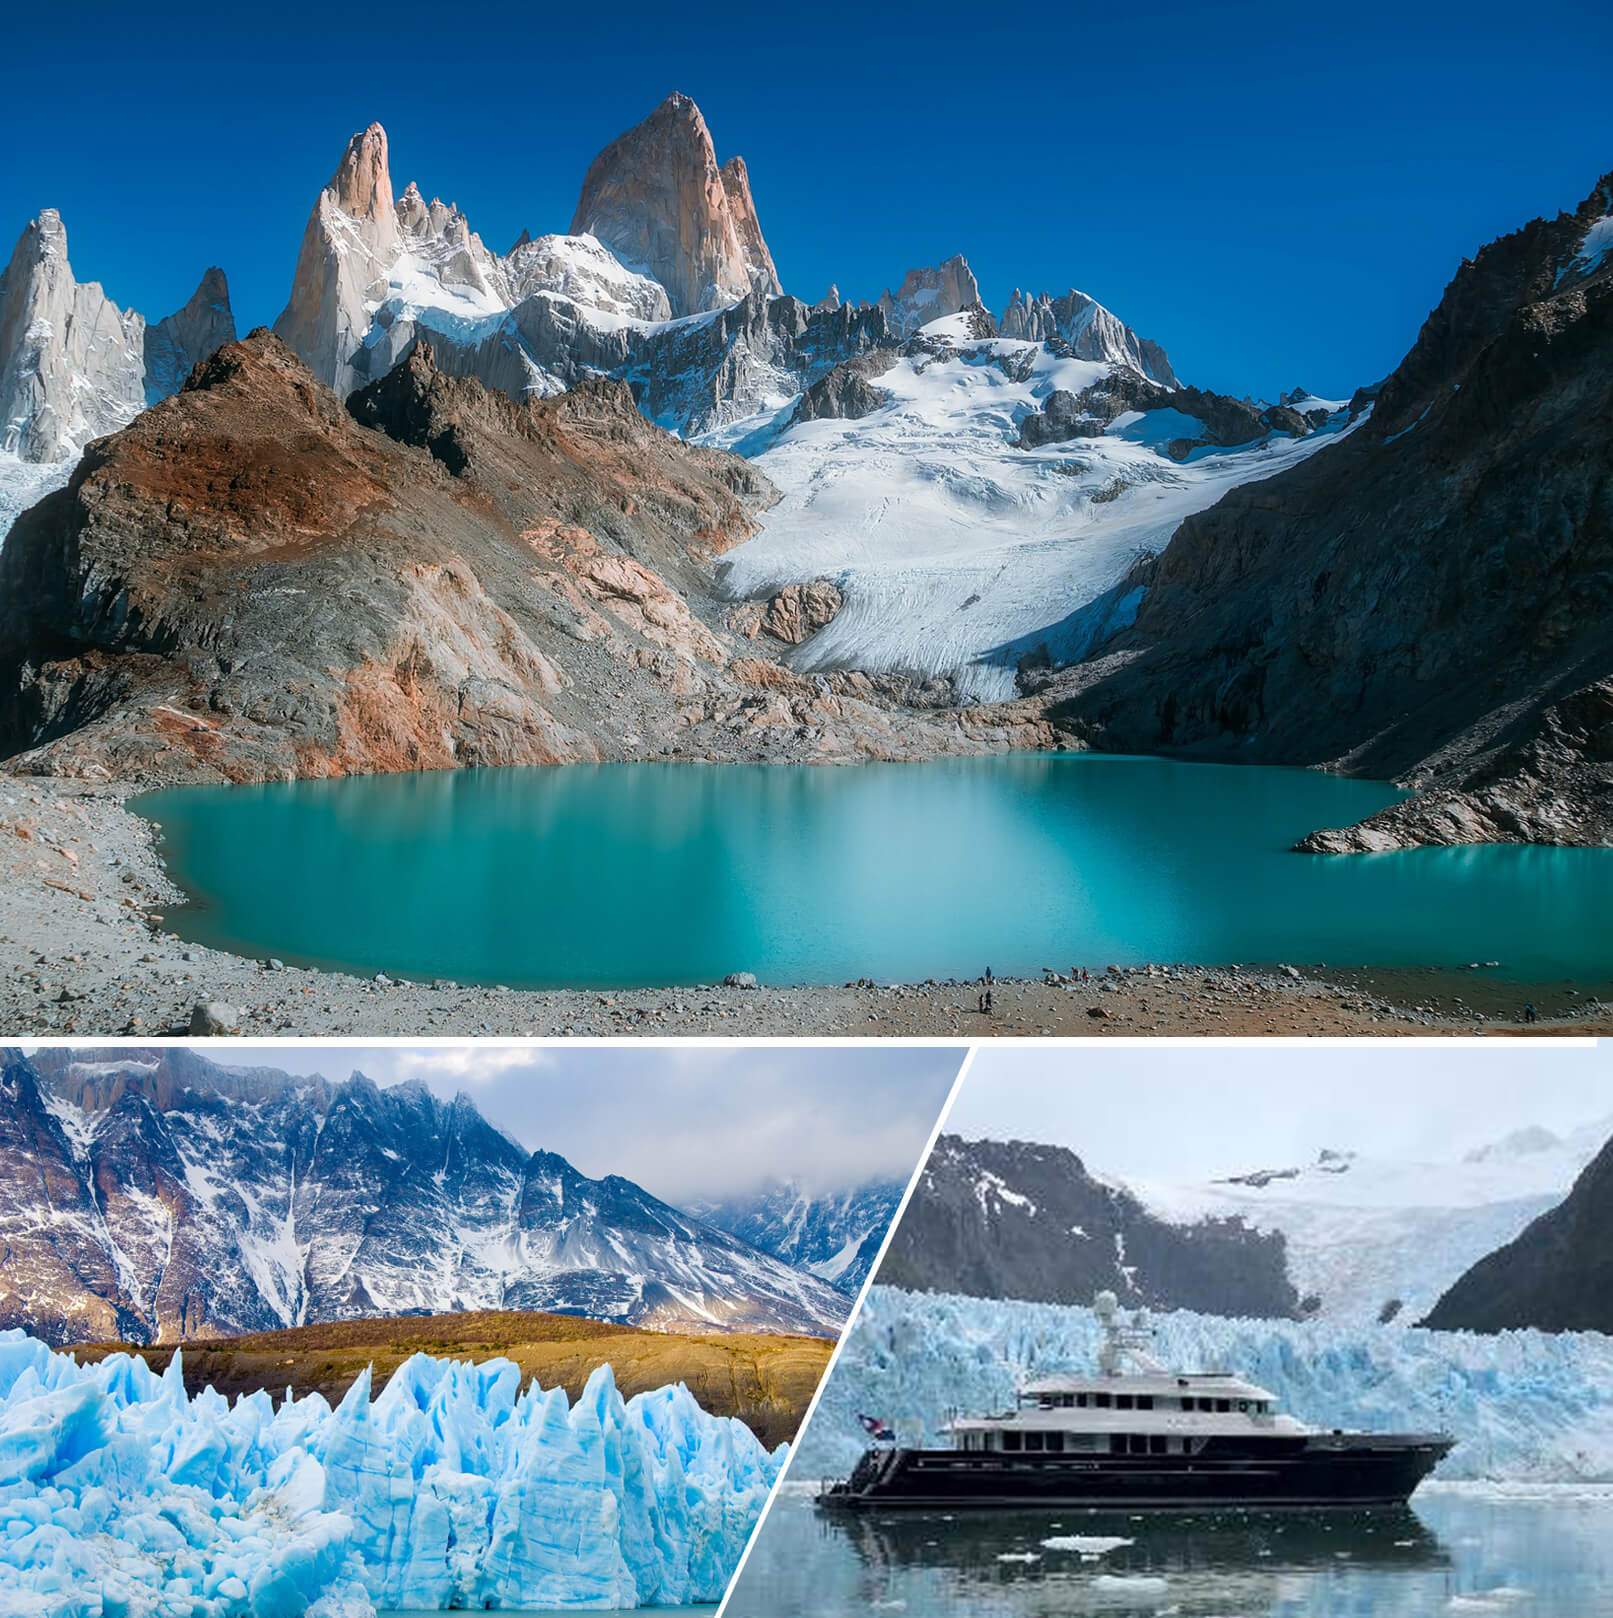 best expedition yachts